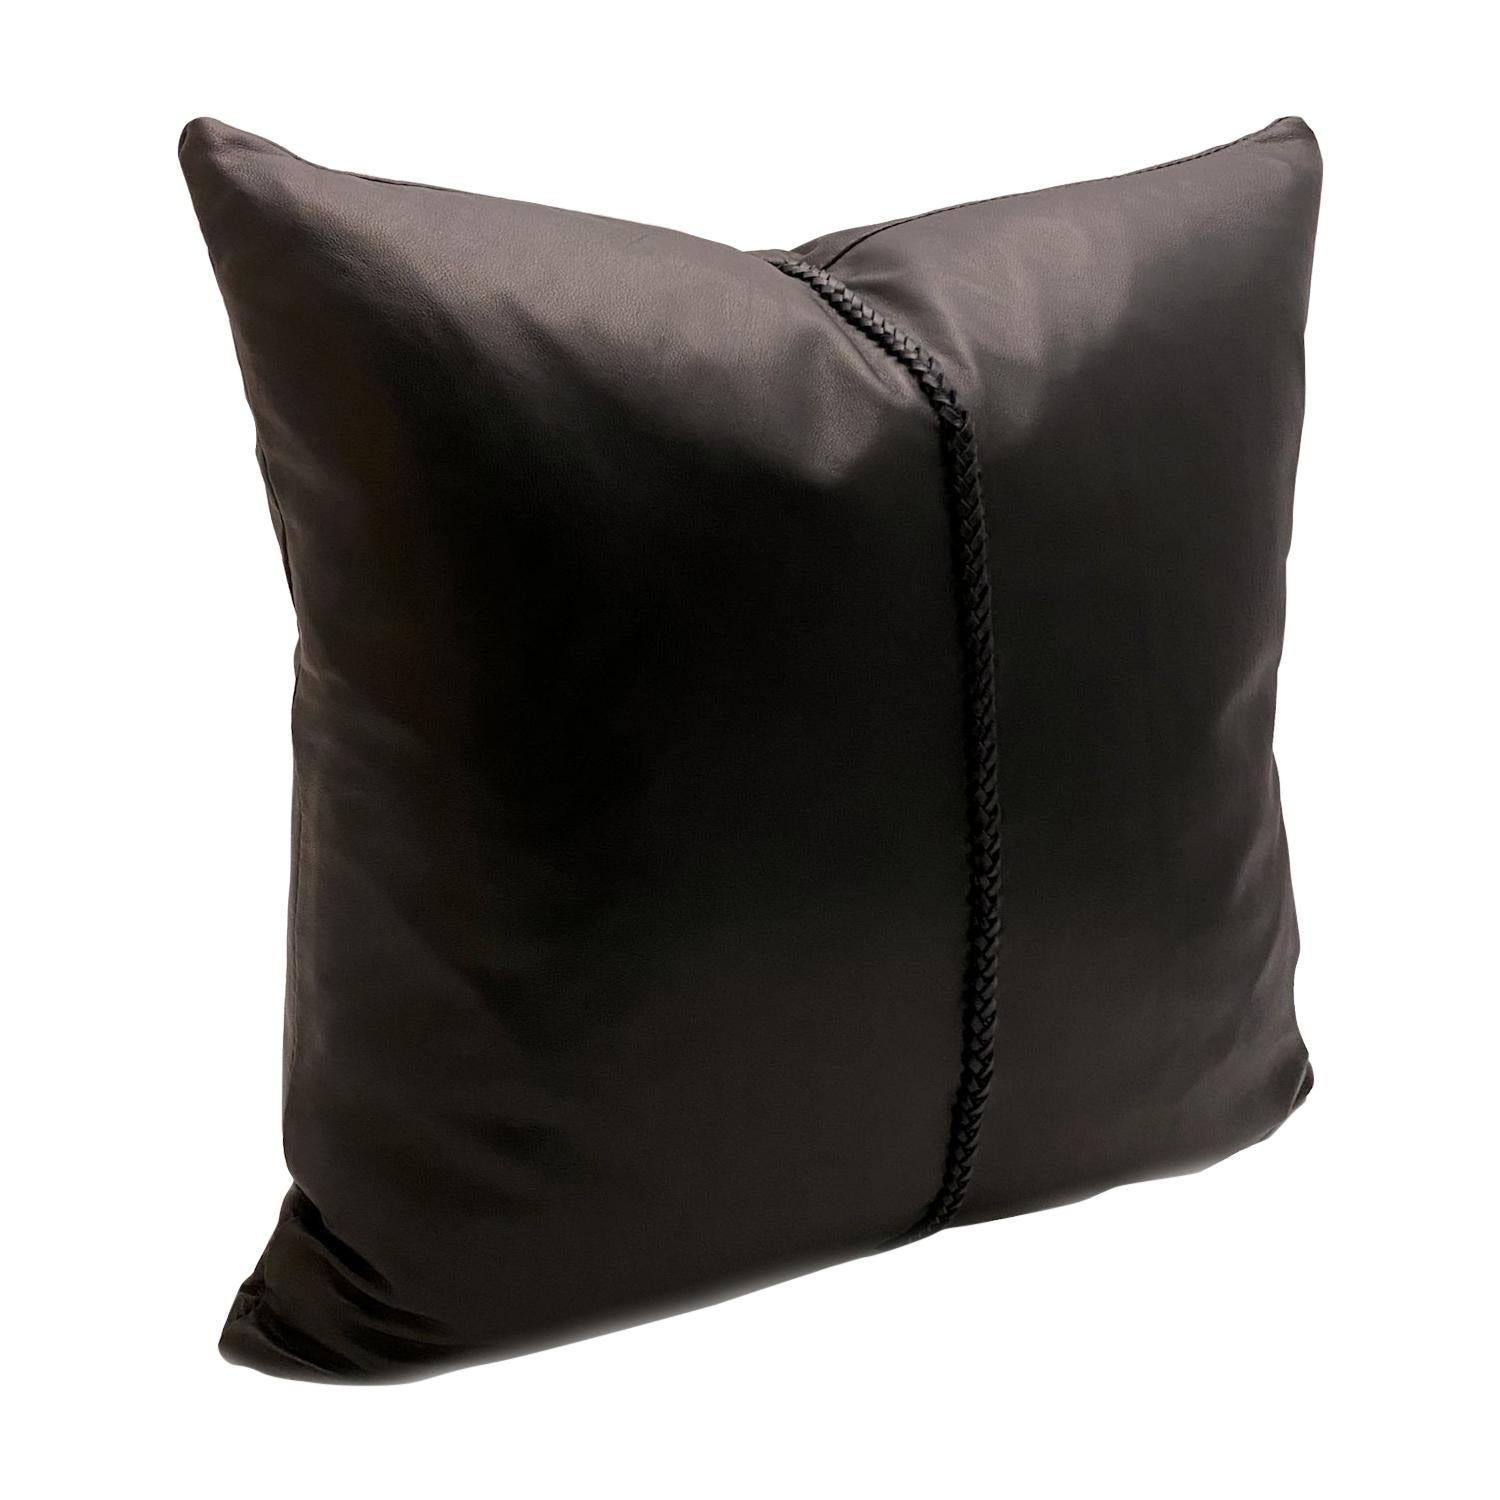 Black Leather Pillow with Leather Cross Stitch